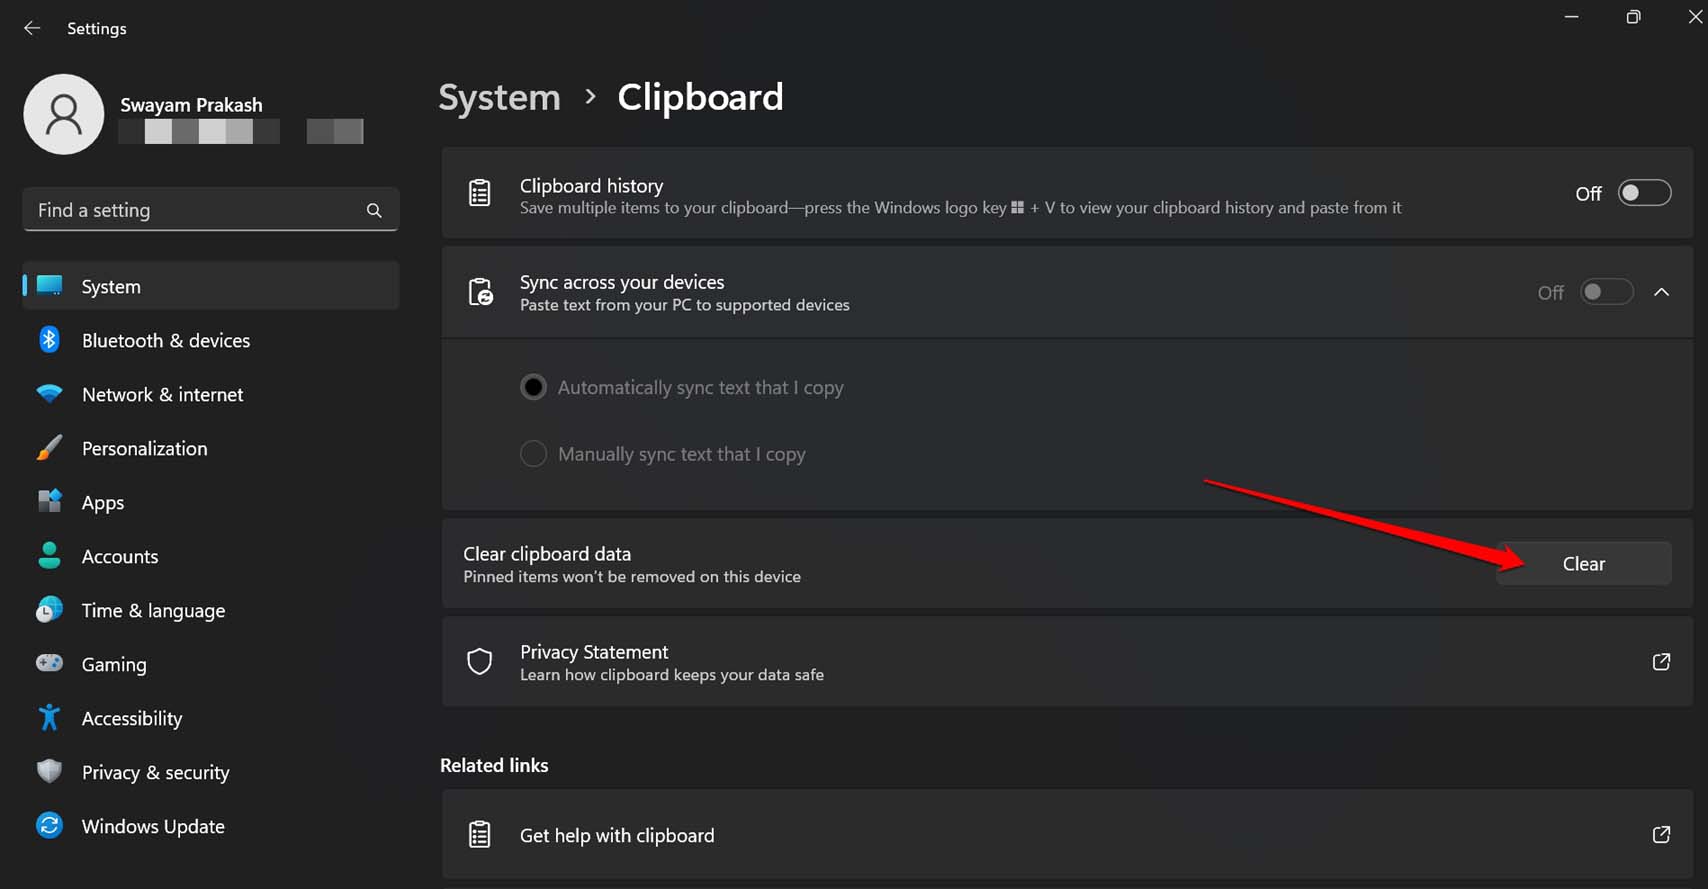 clear clipboard history from the Settings app in Windows